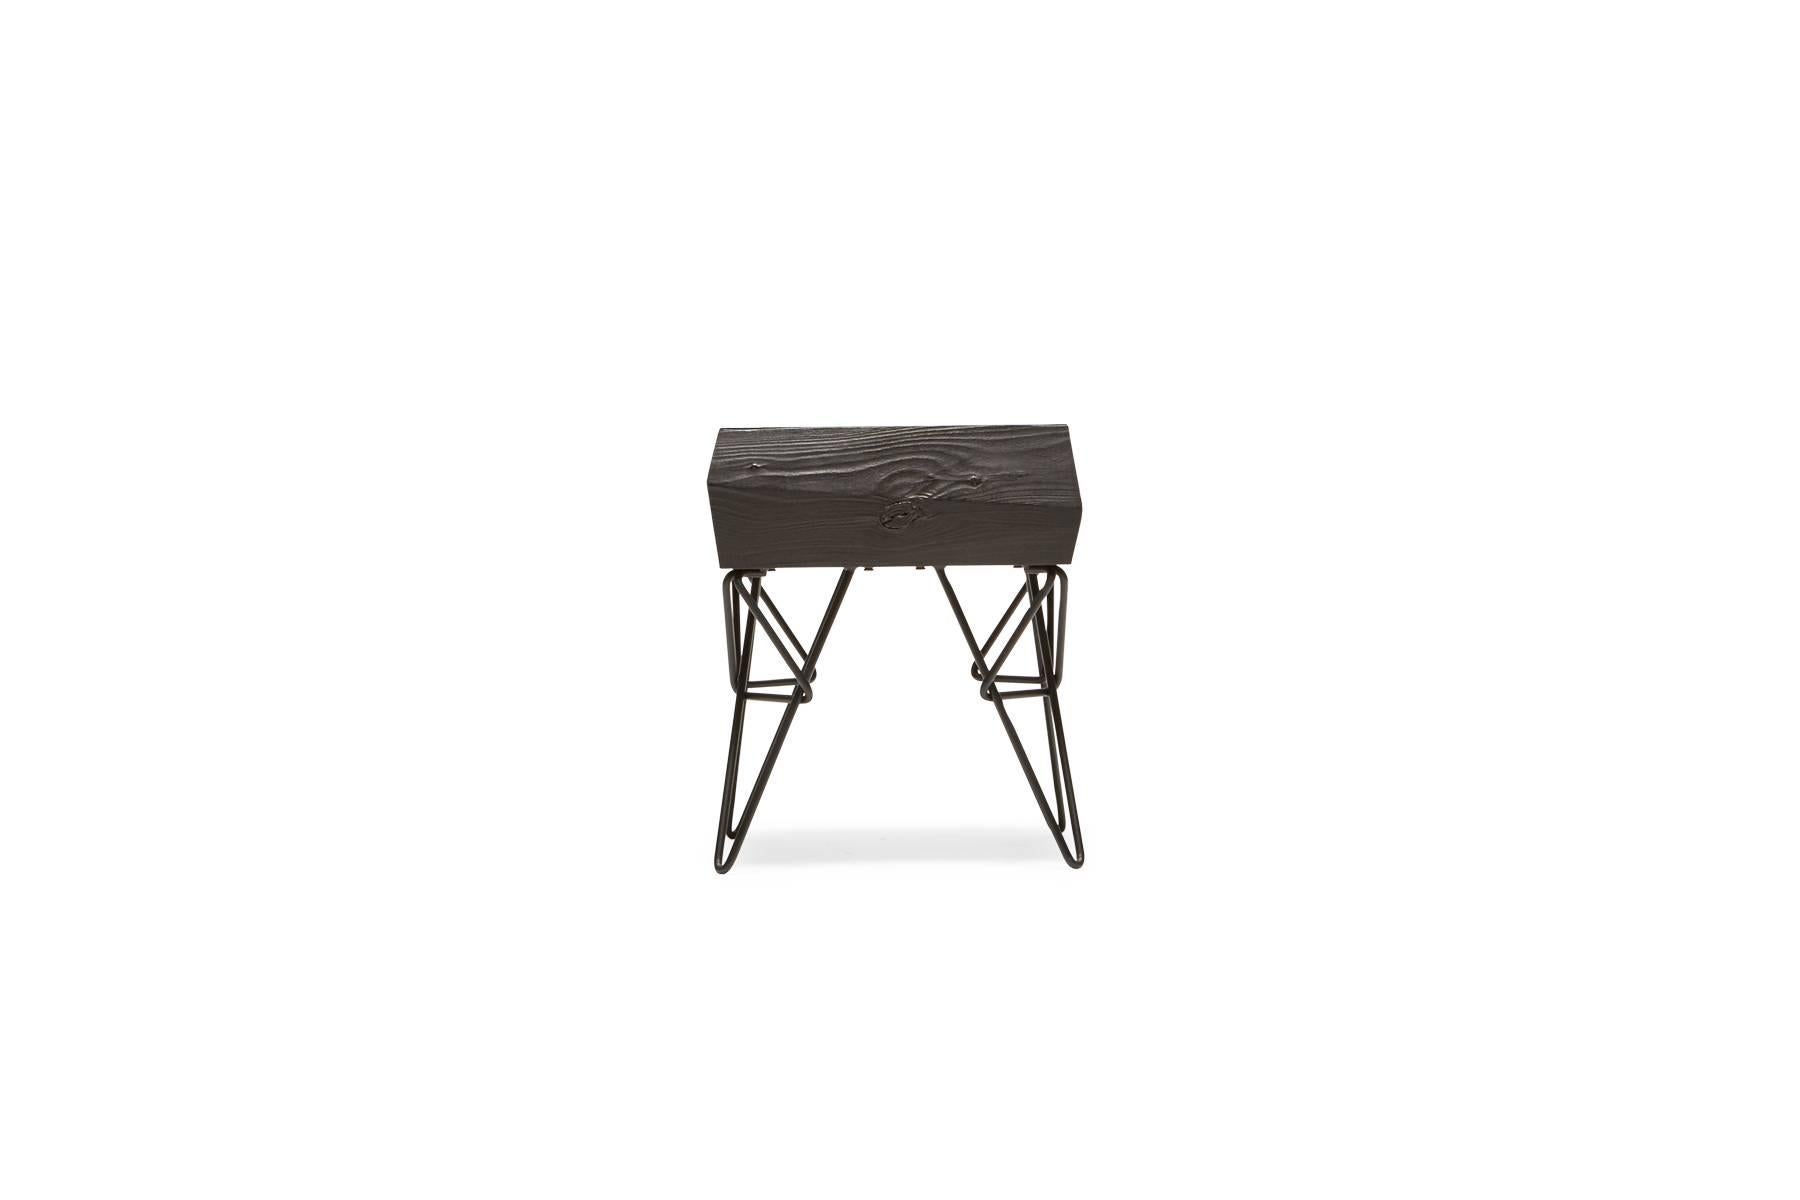 Sandblasted then ebonized alder wood to simulate the effect that water and sand have on driftwood, paired with matte black steel legs. The table has a hidden drawer to allow for out-of-sight storage.